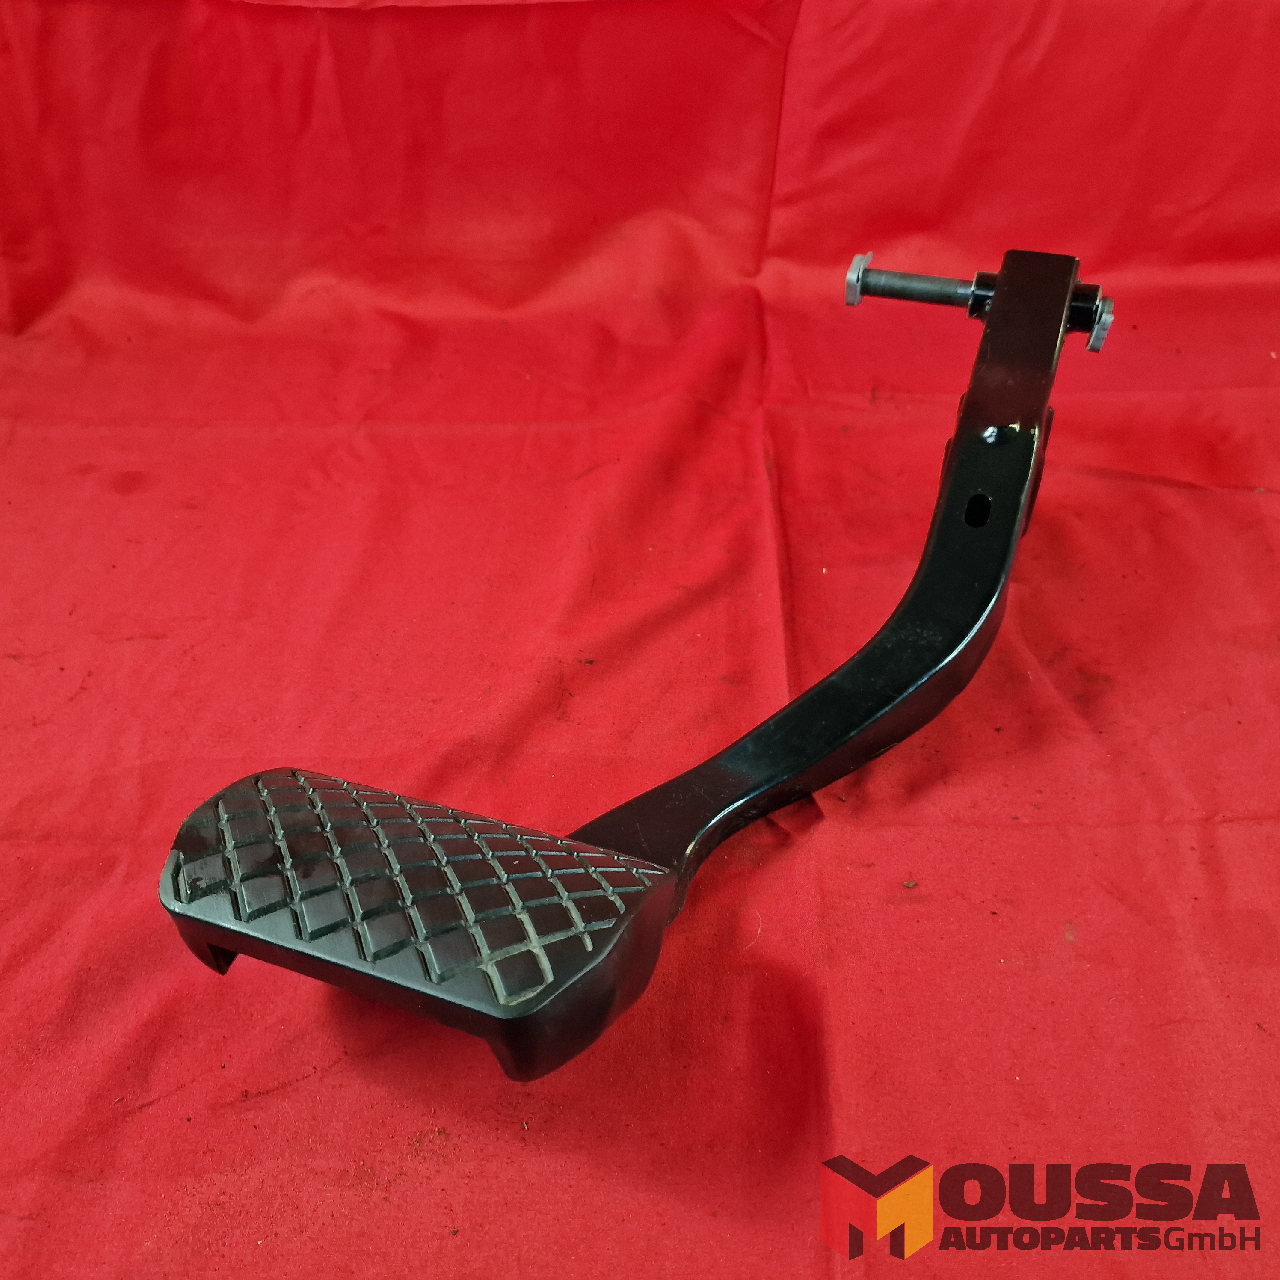 MOUSSA-AUTOPARTS-656dded3546f8.jpg